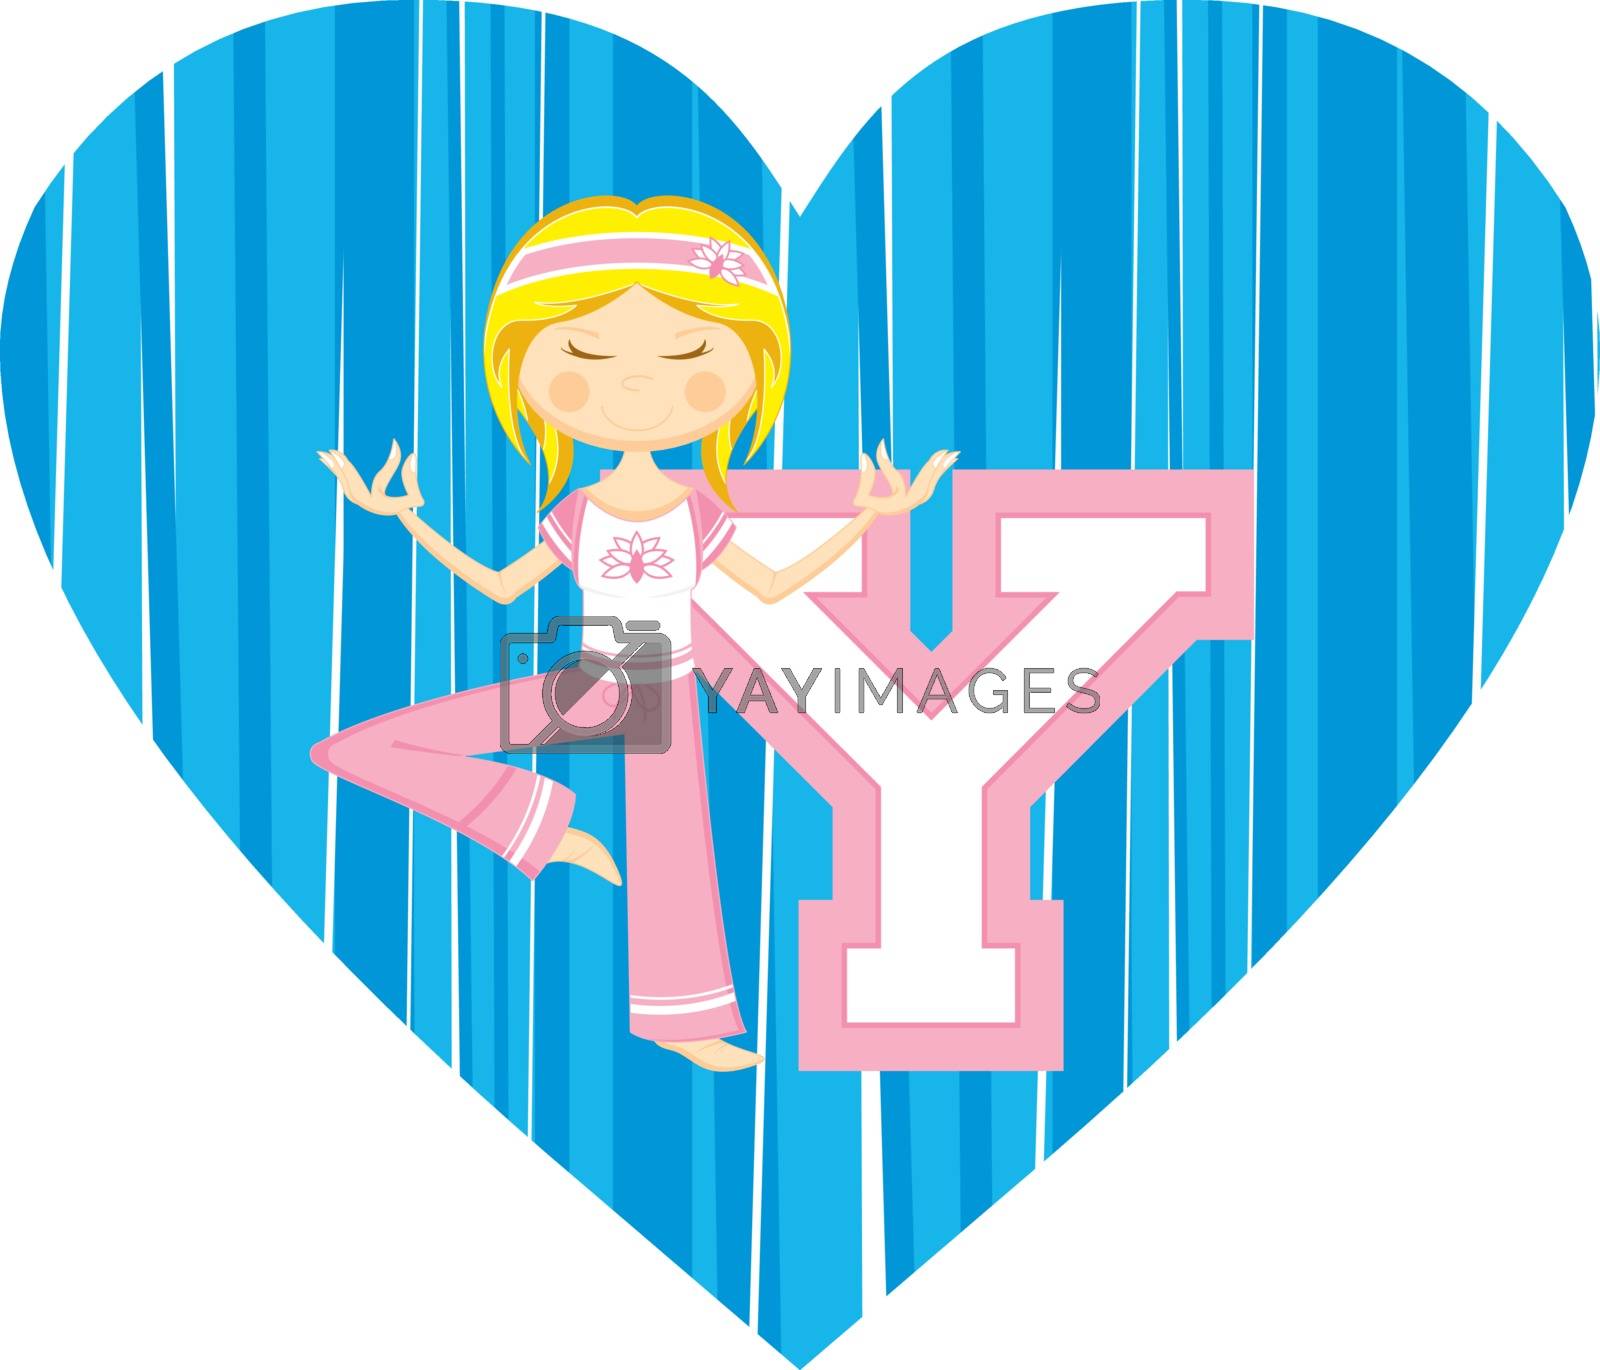 Royalty free image of Y is for Yoga Illustration by markmurphycreative